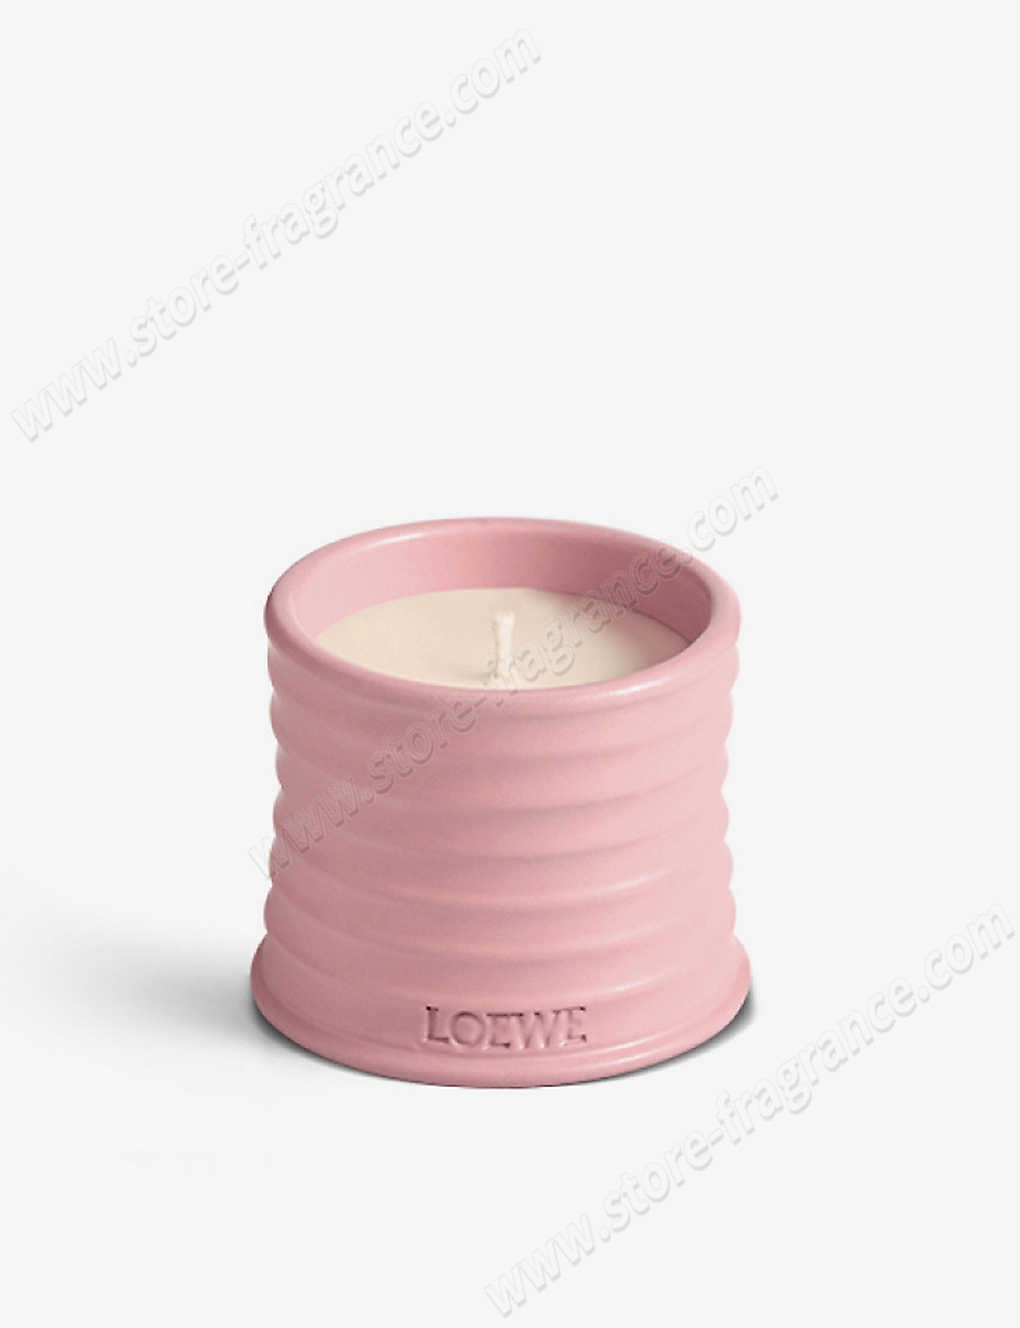 LOEWE/Ivy small scented candle 170g ✿ Discount Store - LOEWE/Ivy small scented candle 170g ✿ Discount Store